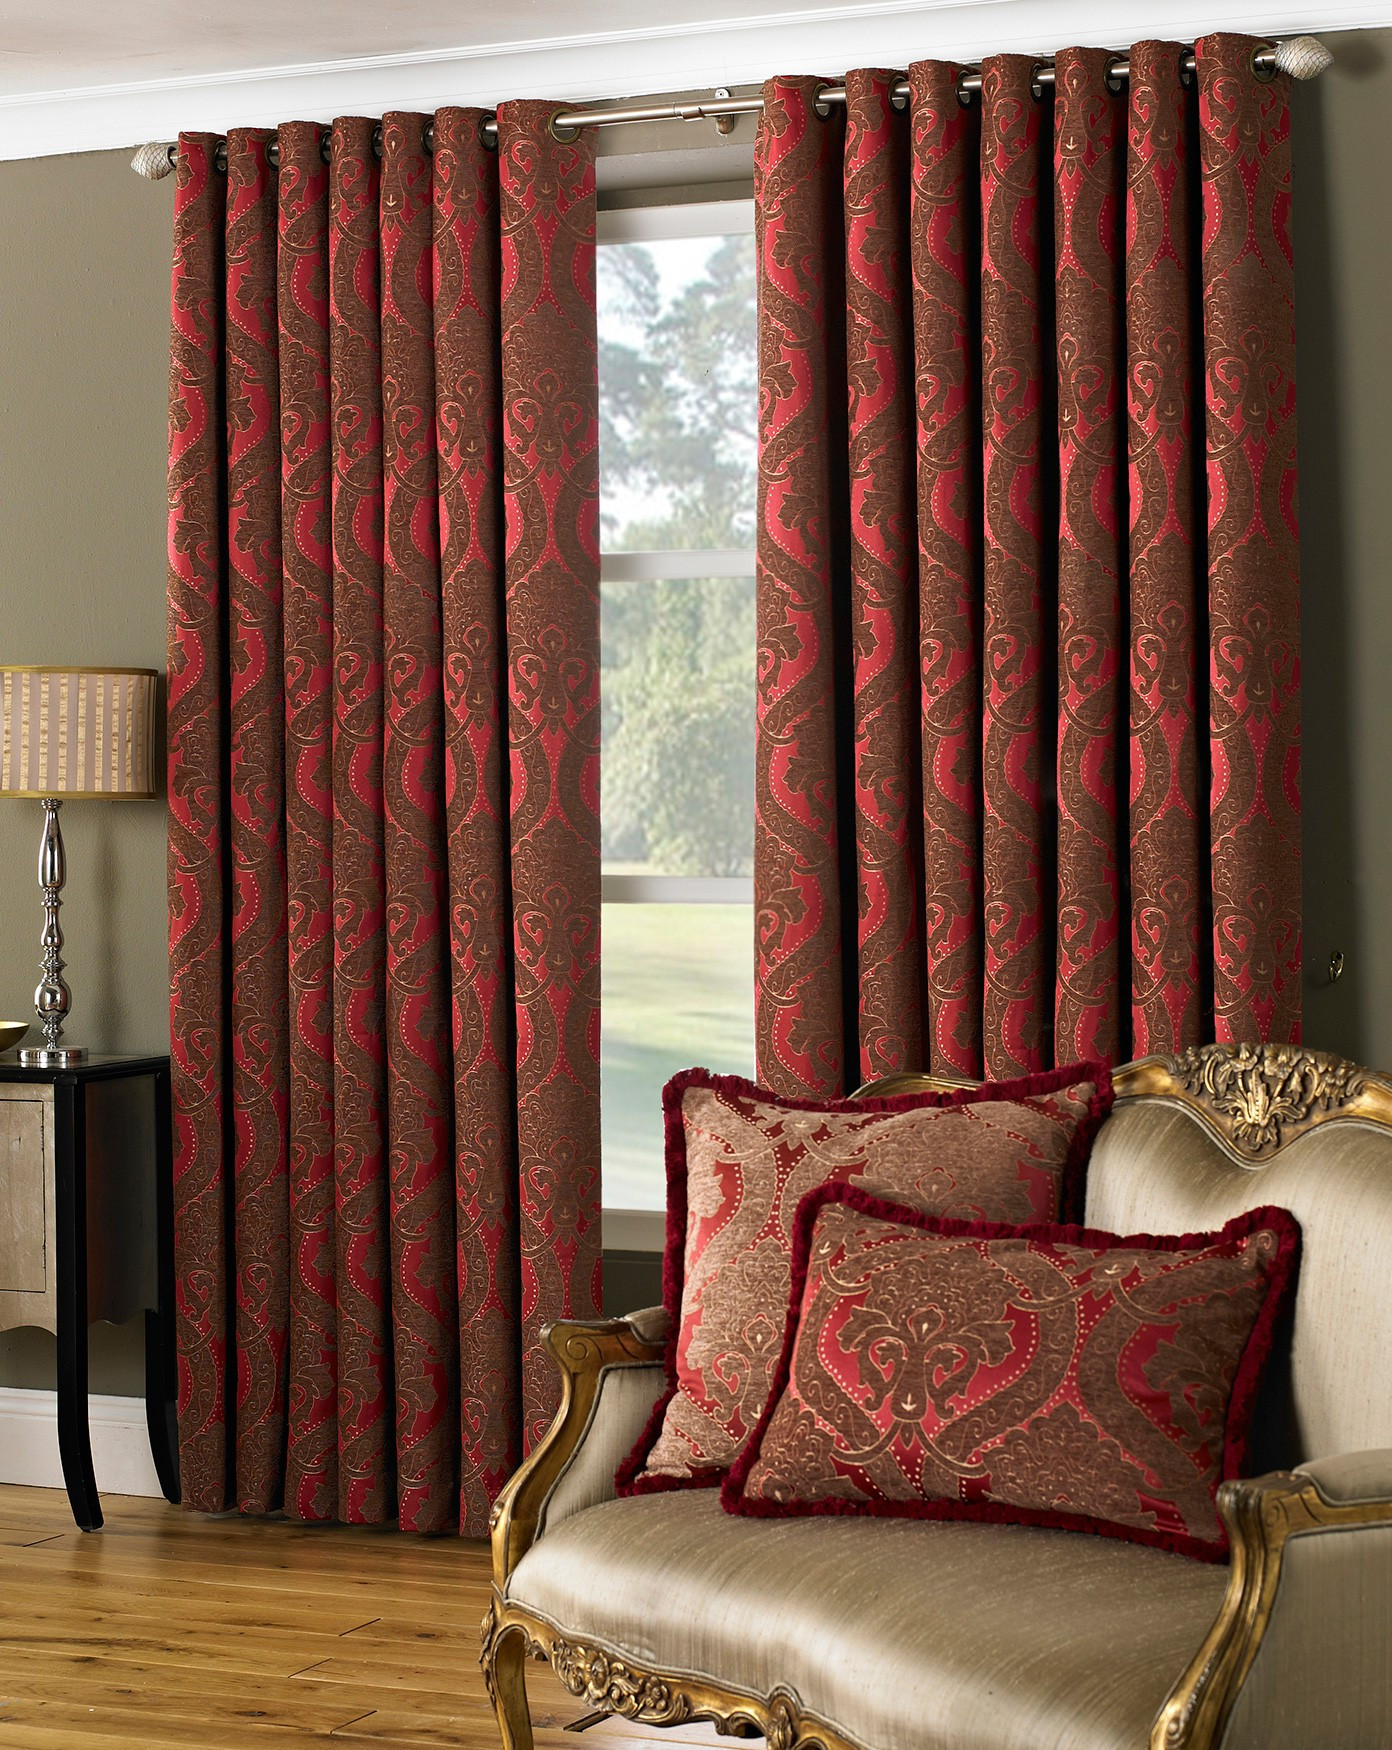 Living Room Curtain Panels
 Burgundy Curtains for Living Room